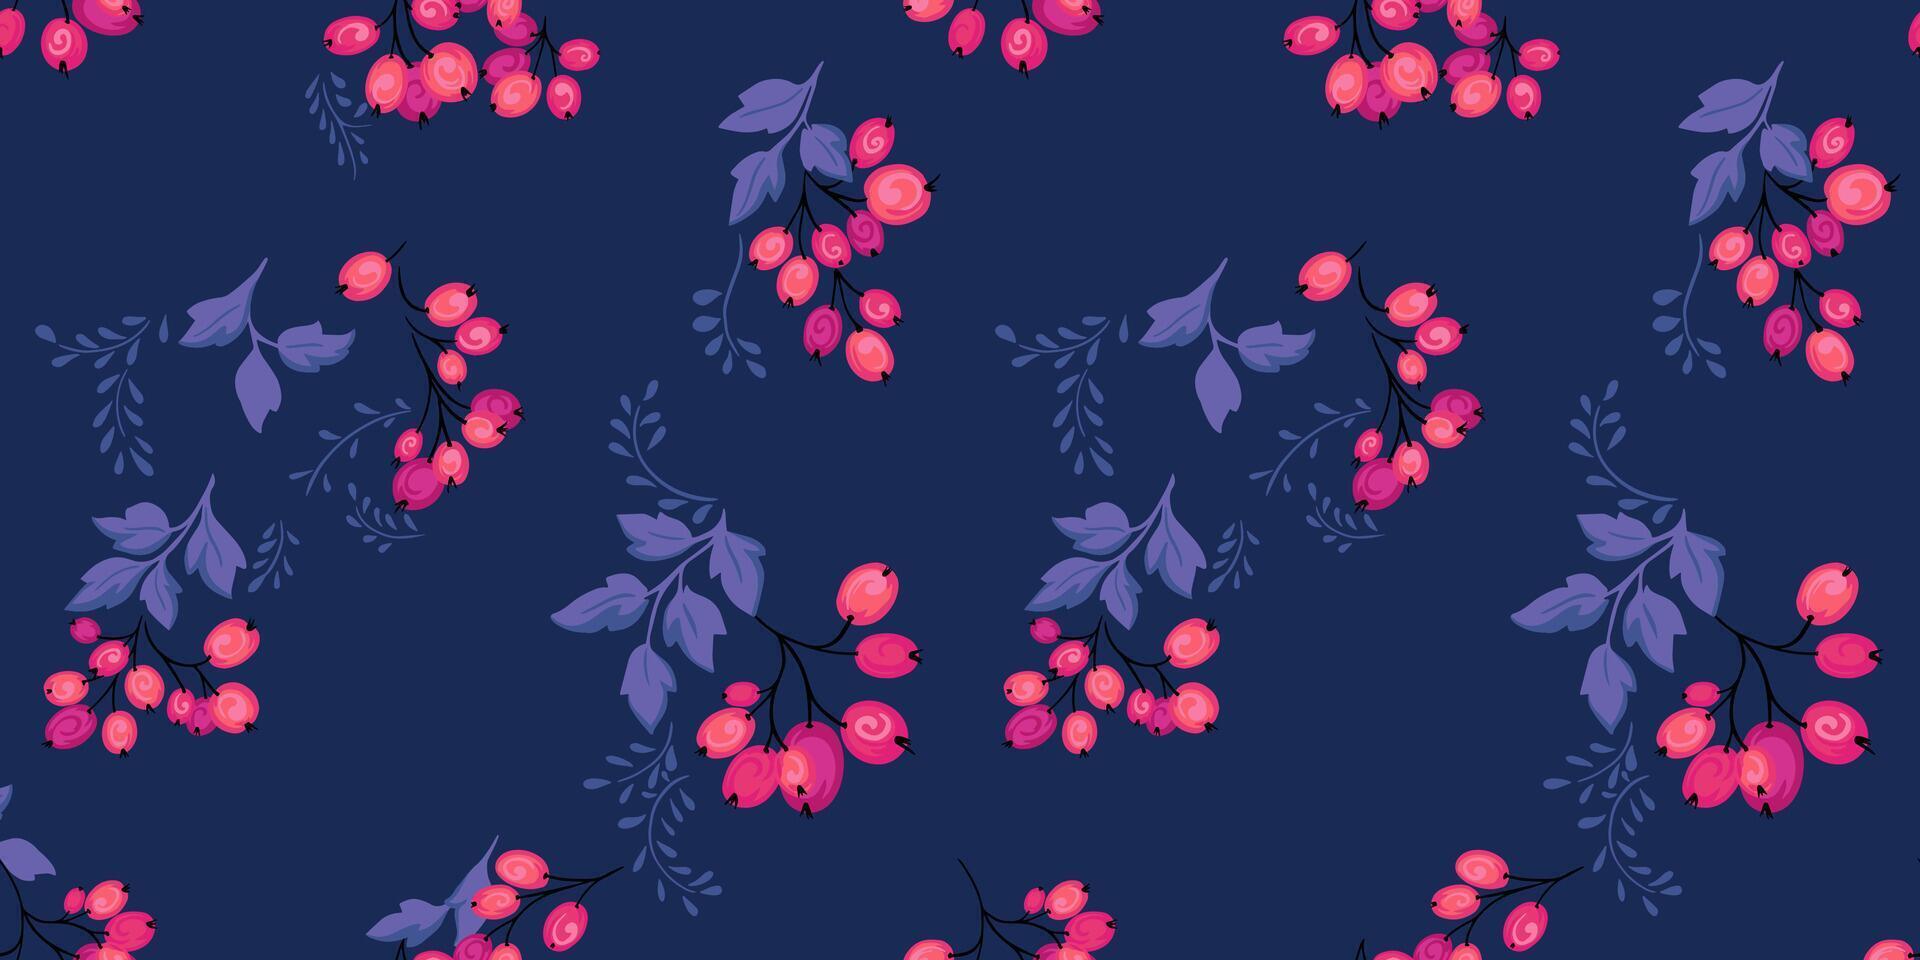 Colorful creative branches of abstract cute berries with tiny leaves seamless pattern on a dark blue background. Vector hand drawn  juniper, boxwood, viburnum, barberry.Collage for designs